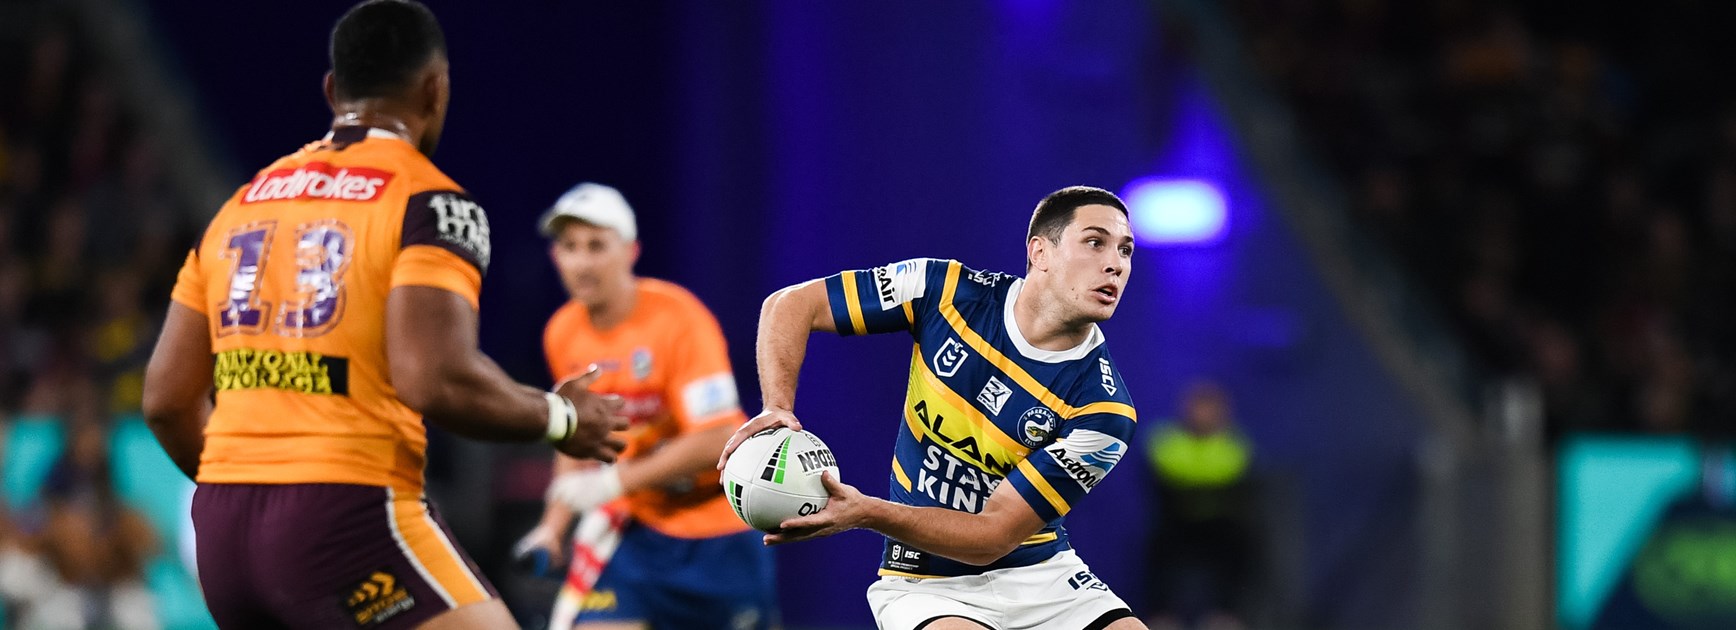 NRL Fantasy: How our Blue & Gold scored, Round 14